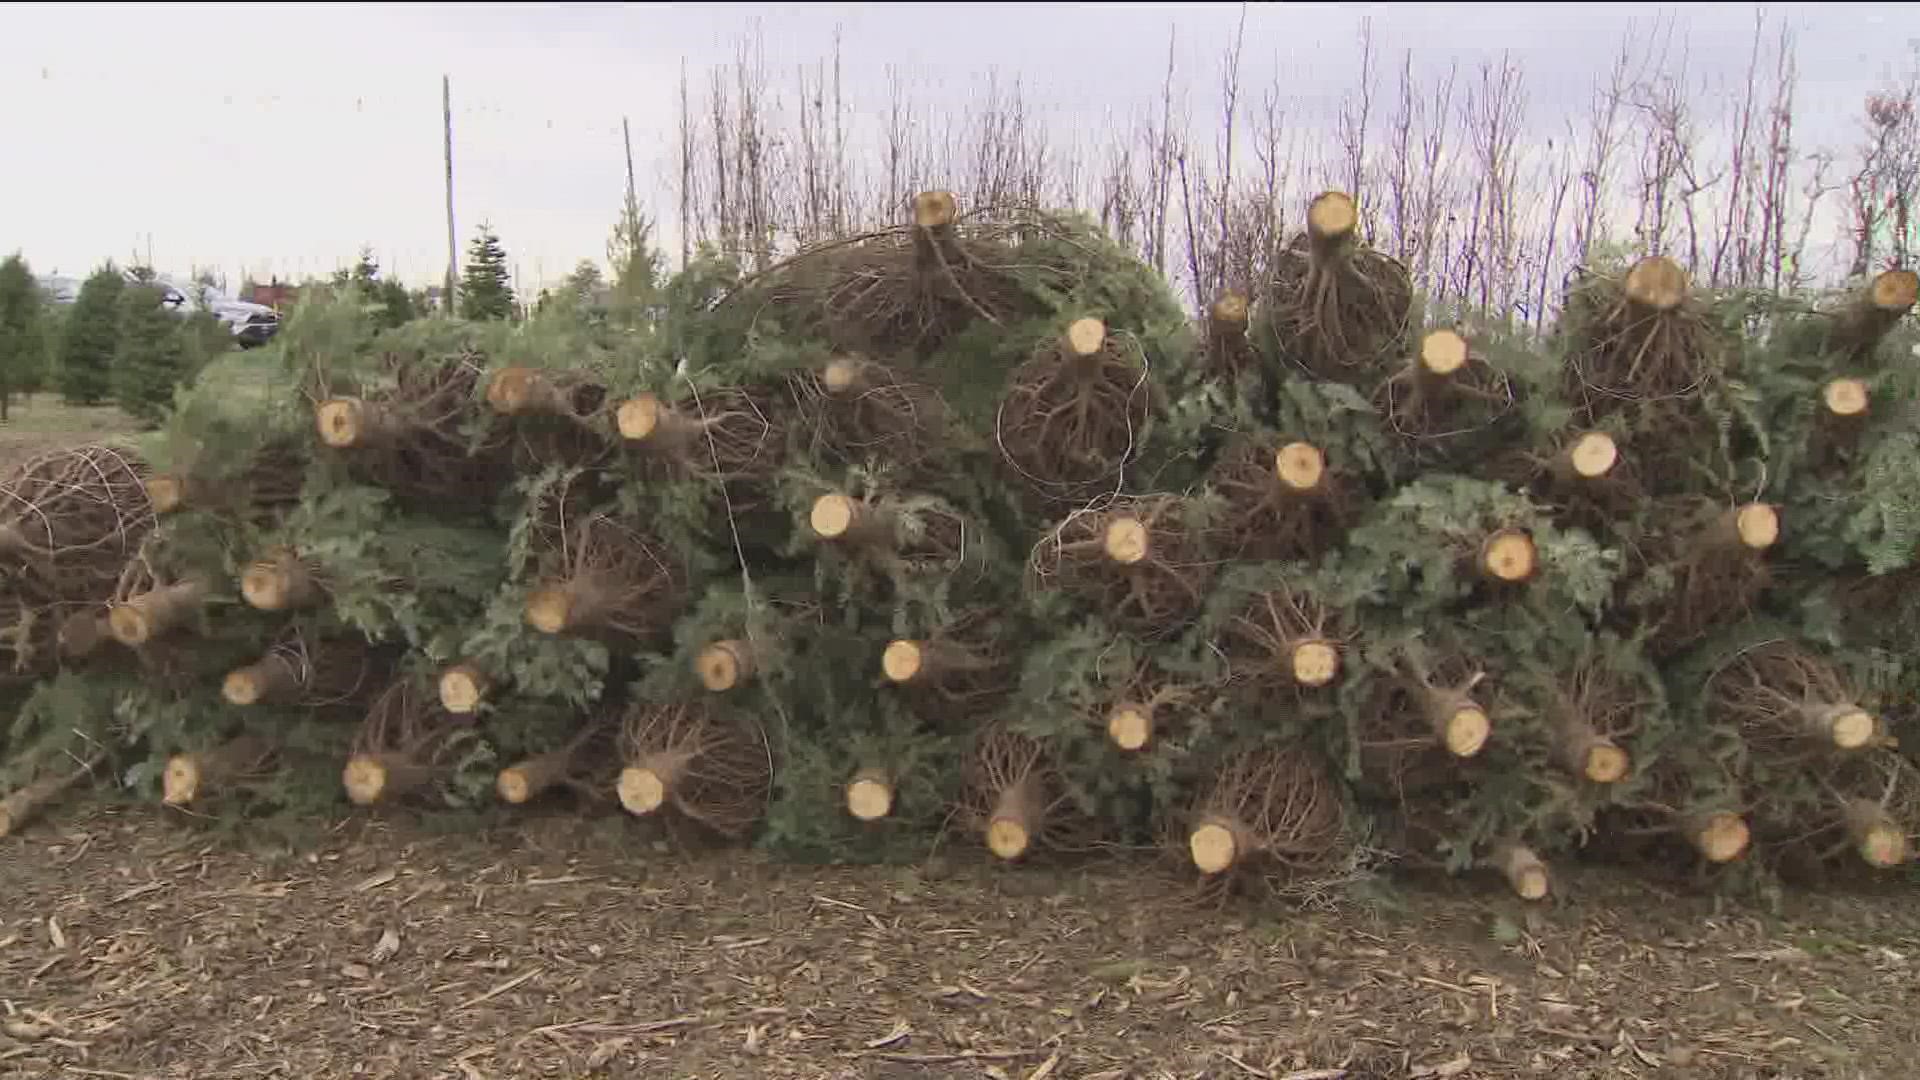 Some Christmas tree lots around the Treasure Valley are sitting with hundreds of leftover trees days before the holiday.